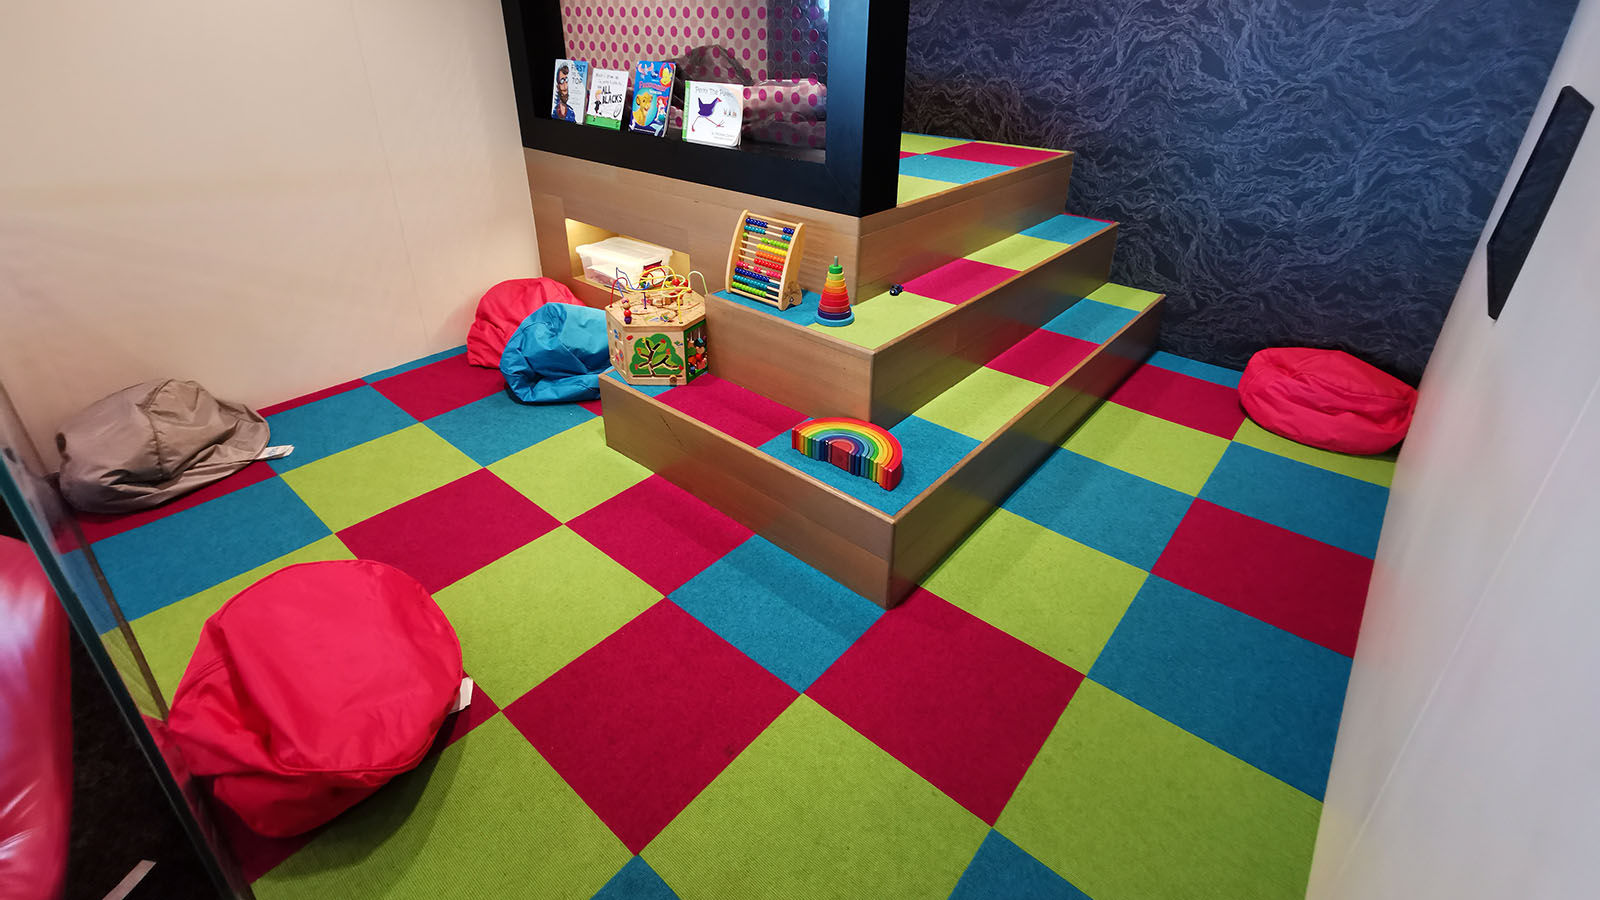 Play area in Air New Zealand's Brisbane lounge